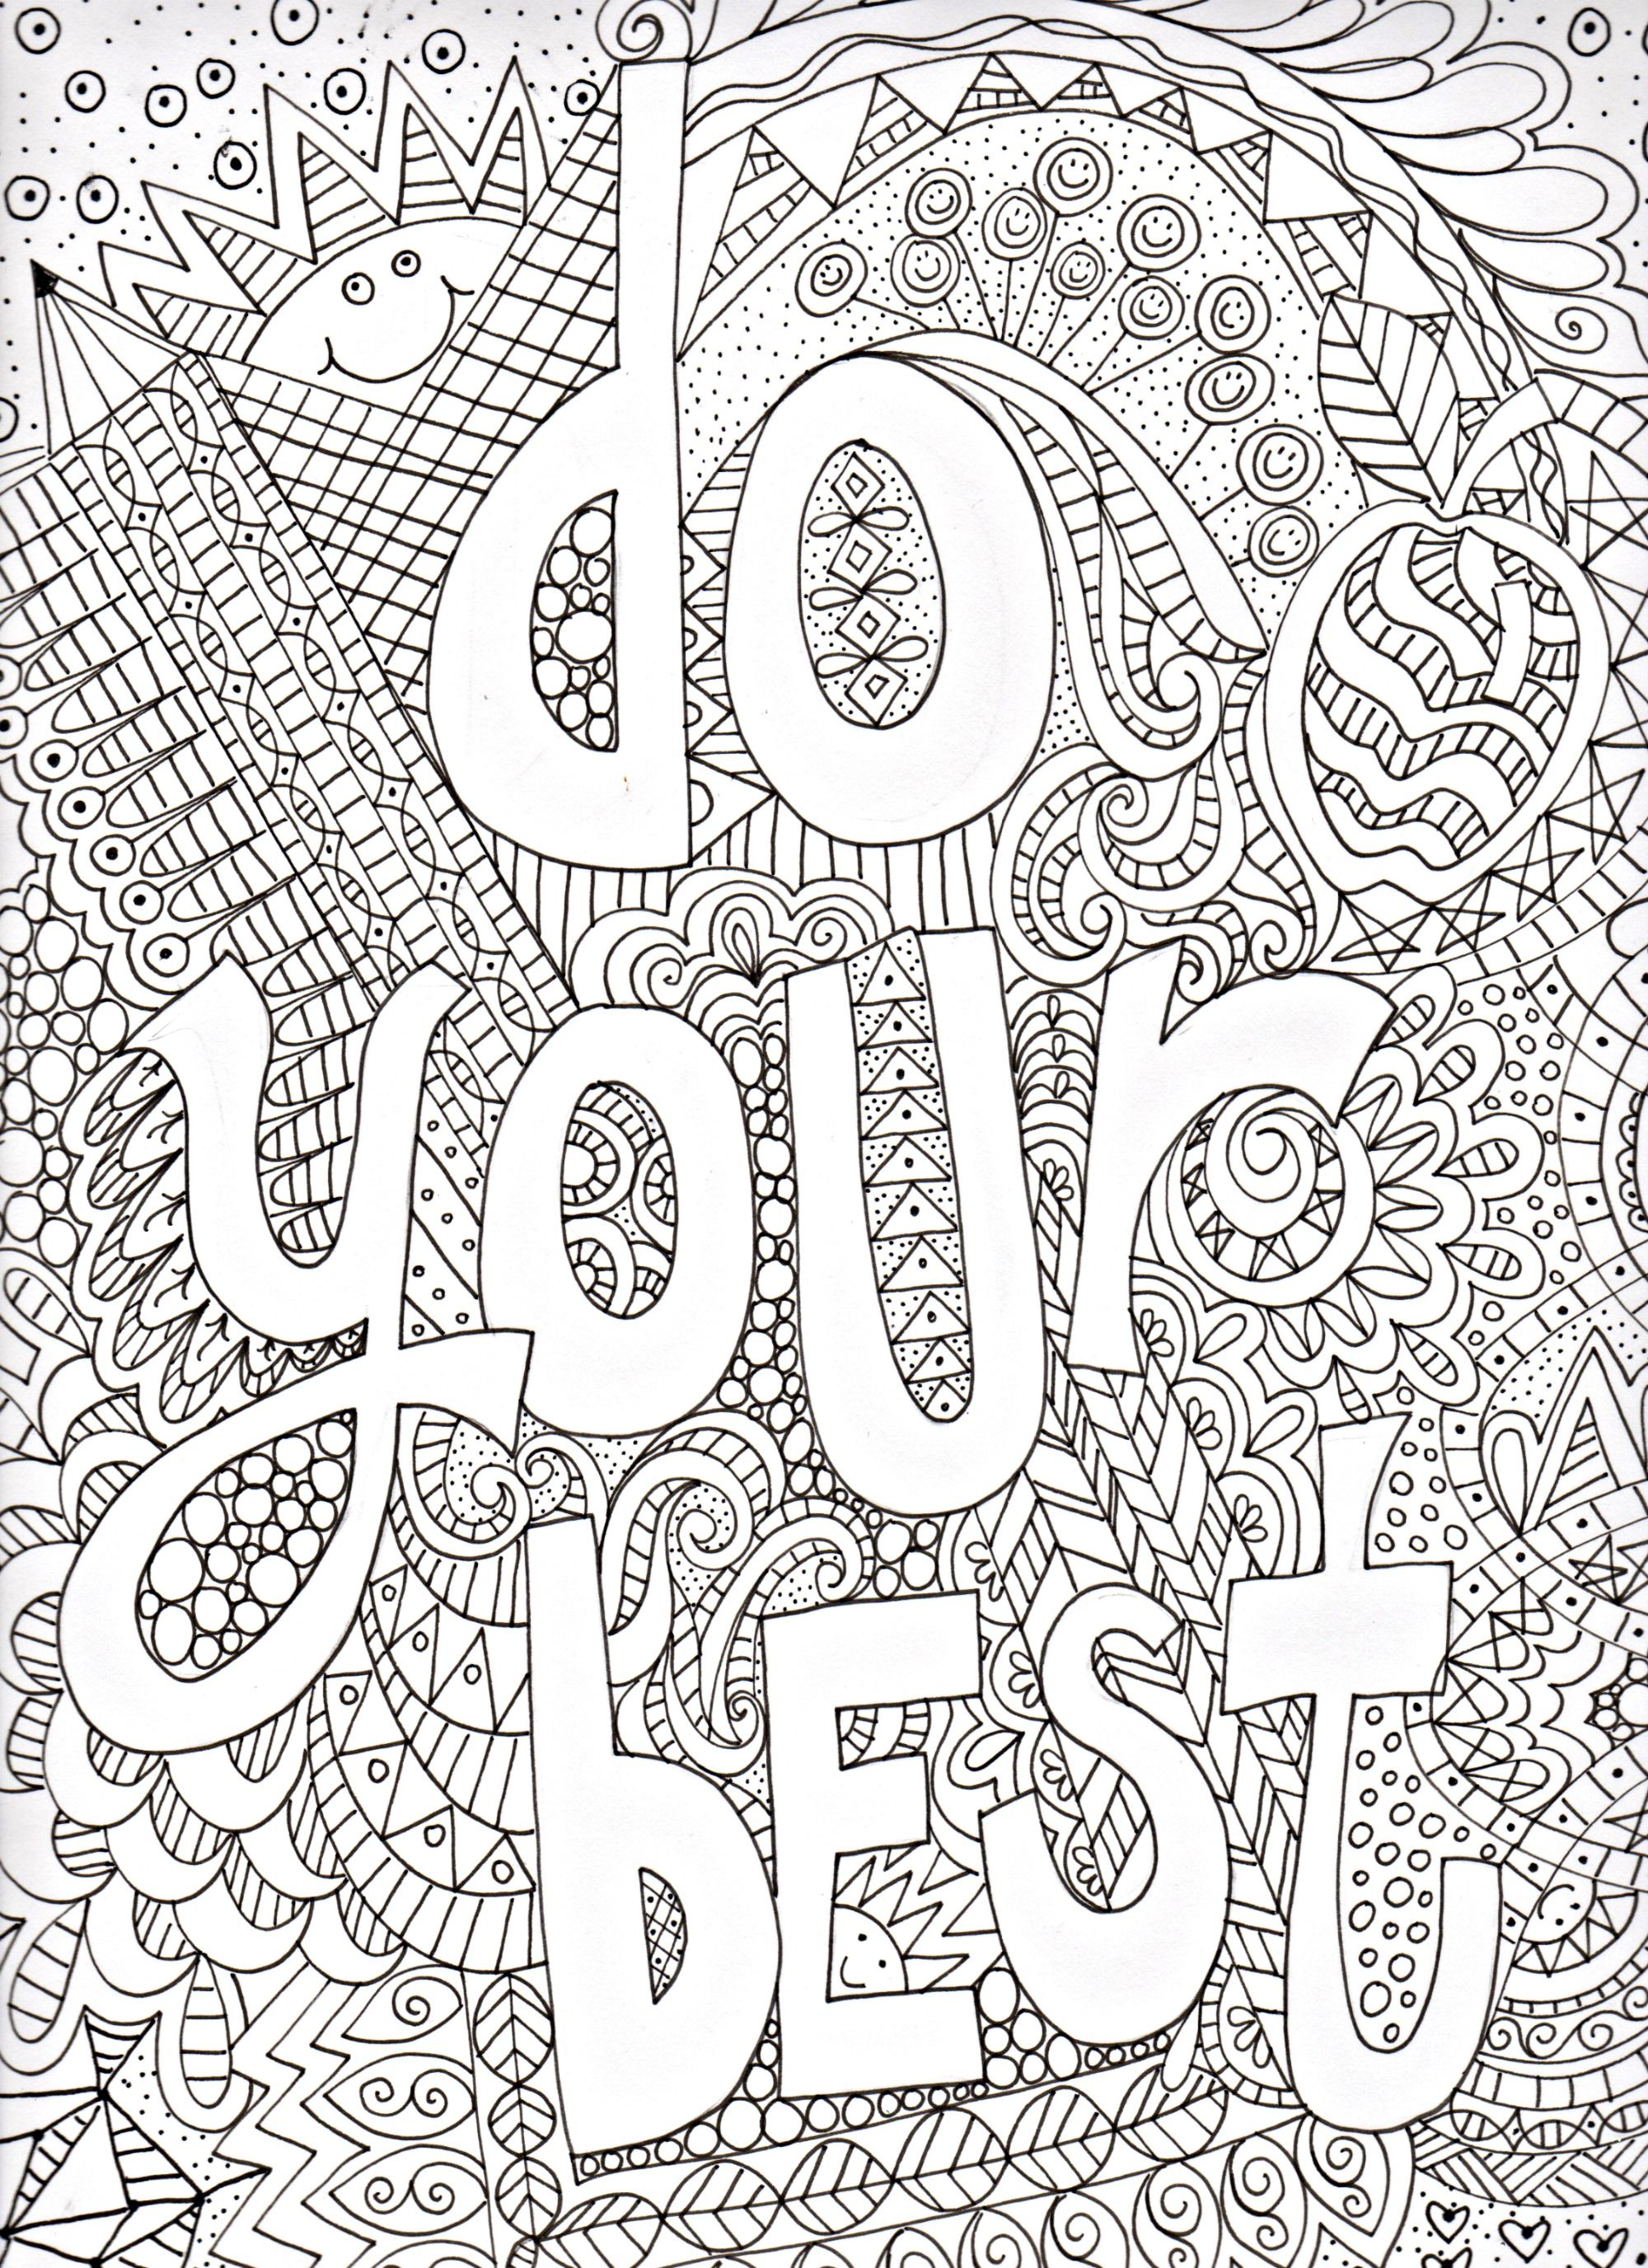 Free Doodle Art Coloring Pages Coloring Home